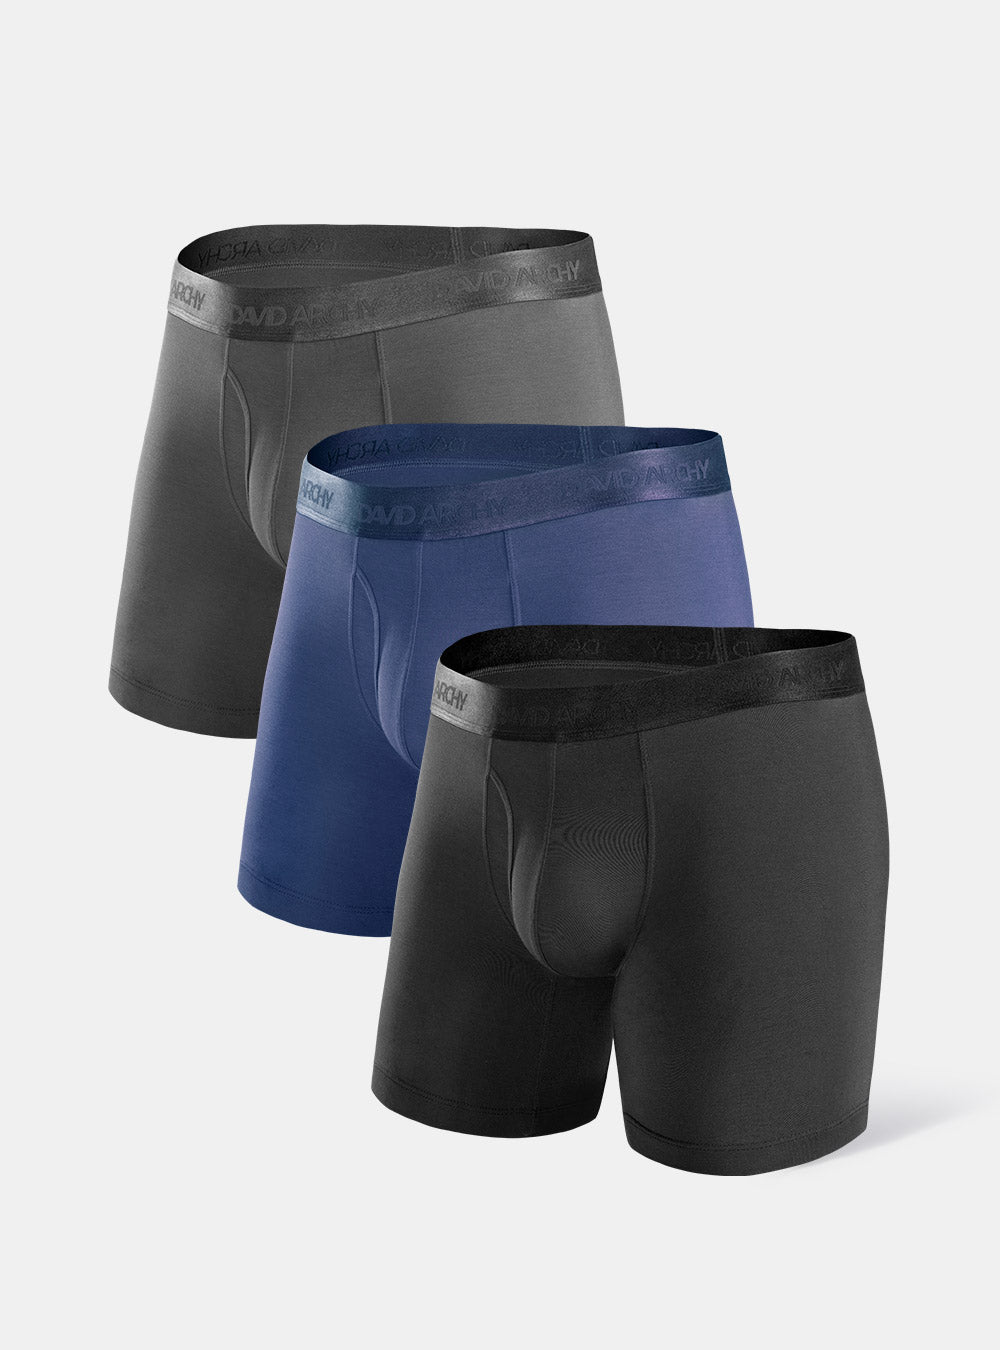 DAVID ARCHY Men's Dual Pouch Underwear Micro Modal Trunks Separate Pouches  with